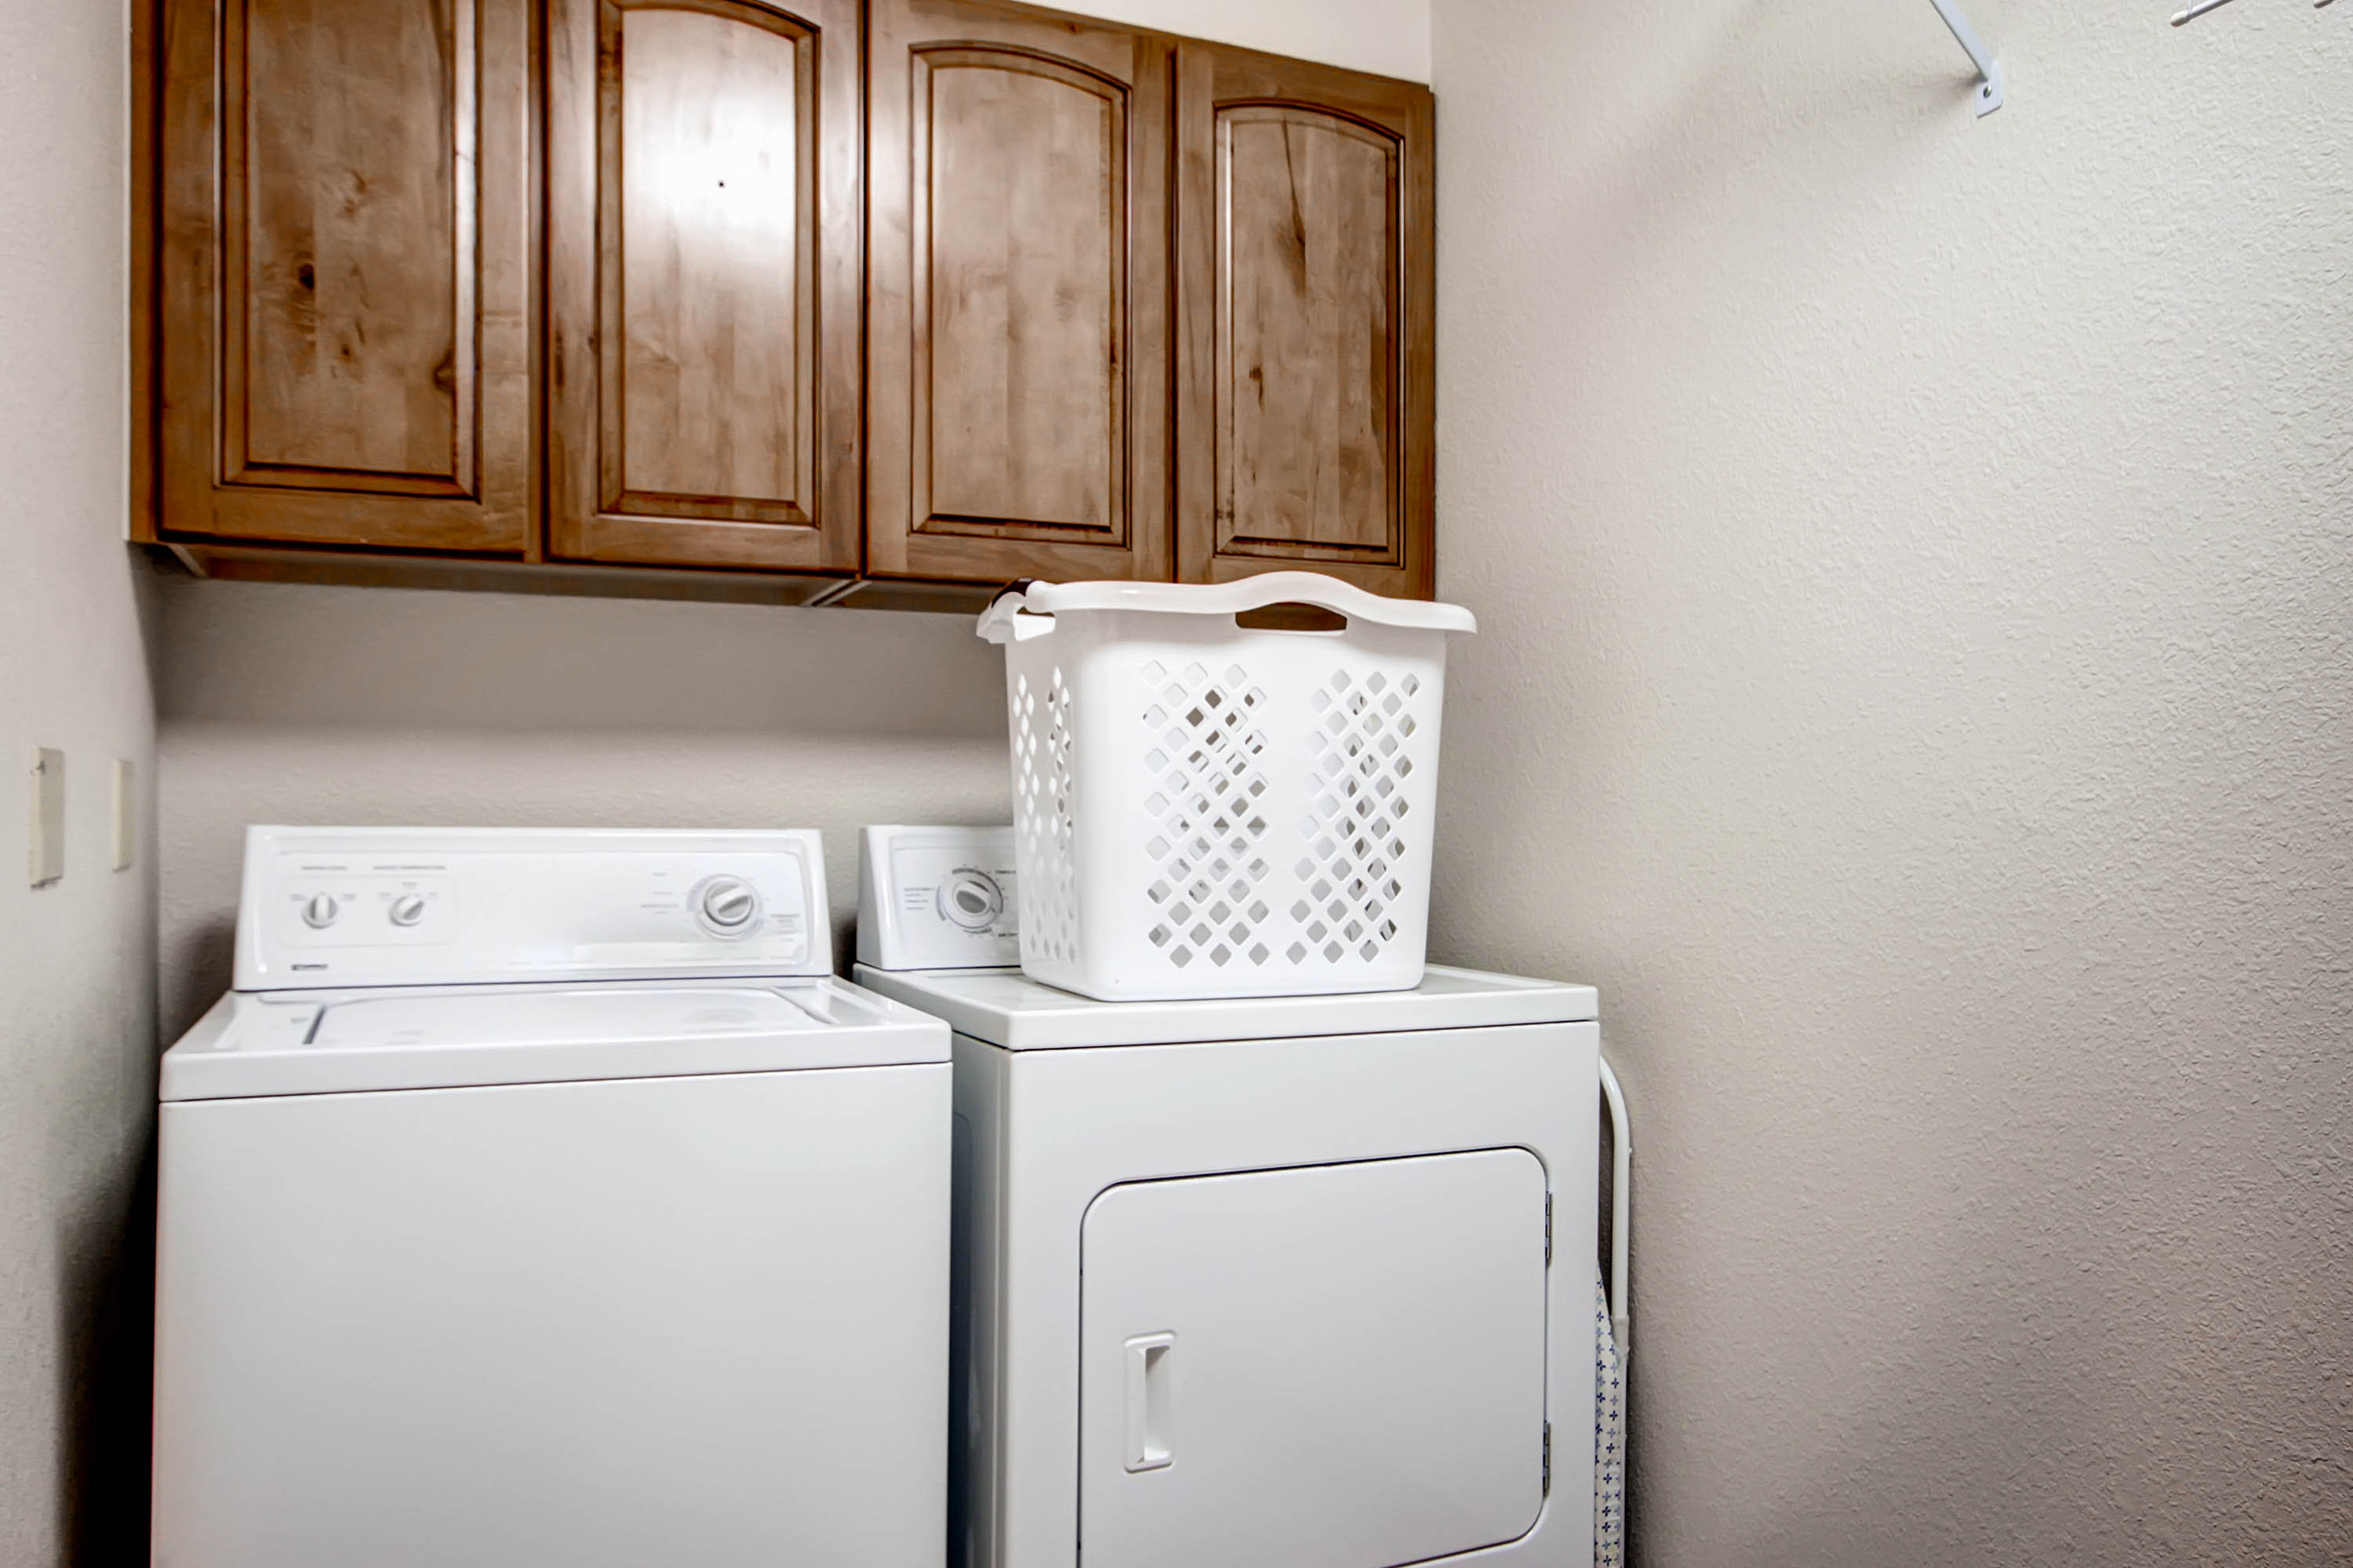 Laundry room on the bottom floor offers full size washer and dryer as well as hanging racks for wet clothes - Amber Sky Breckenridge Vacation Rental